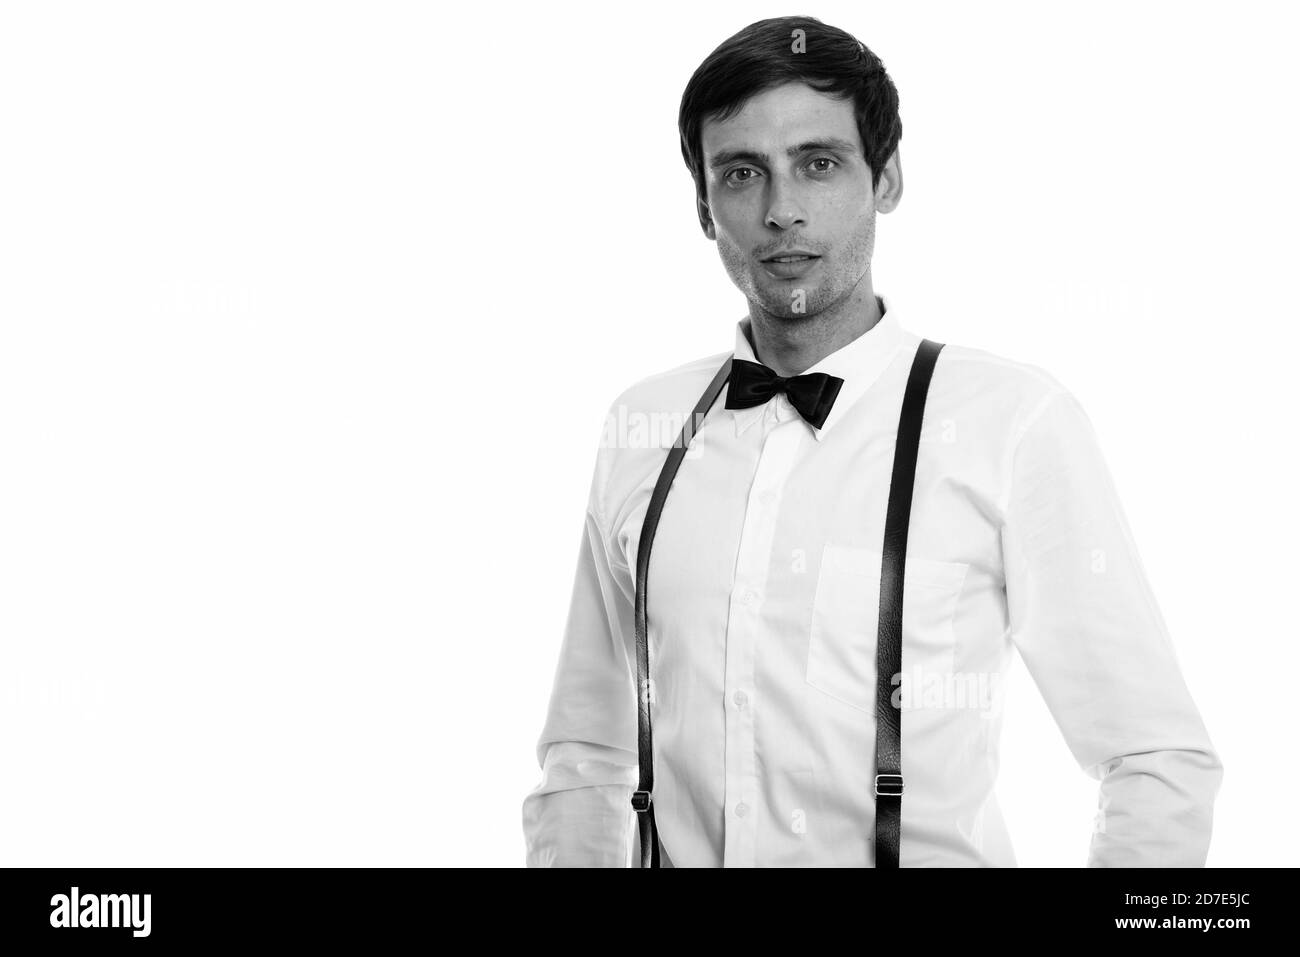 Studio shot of young handsome man wearing suspenders and bow tie Stock Photo